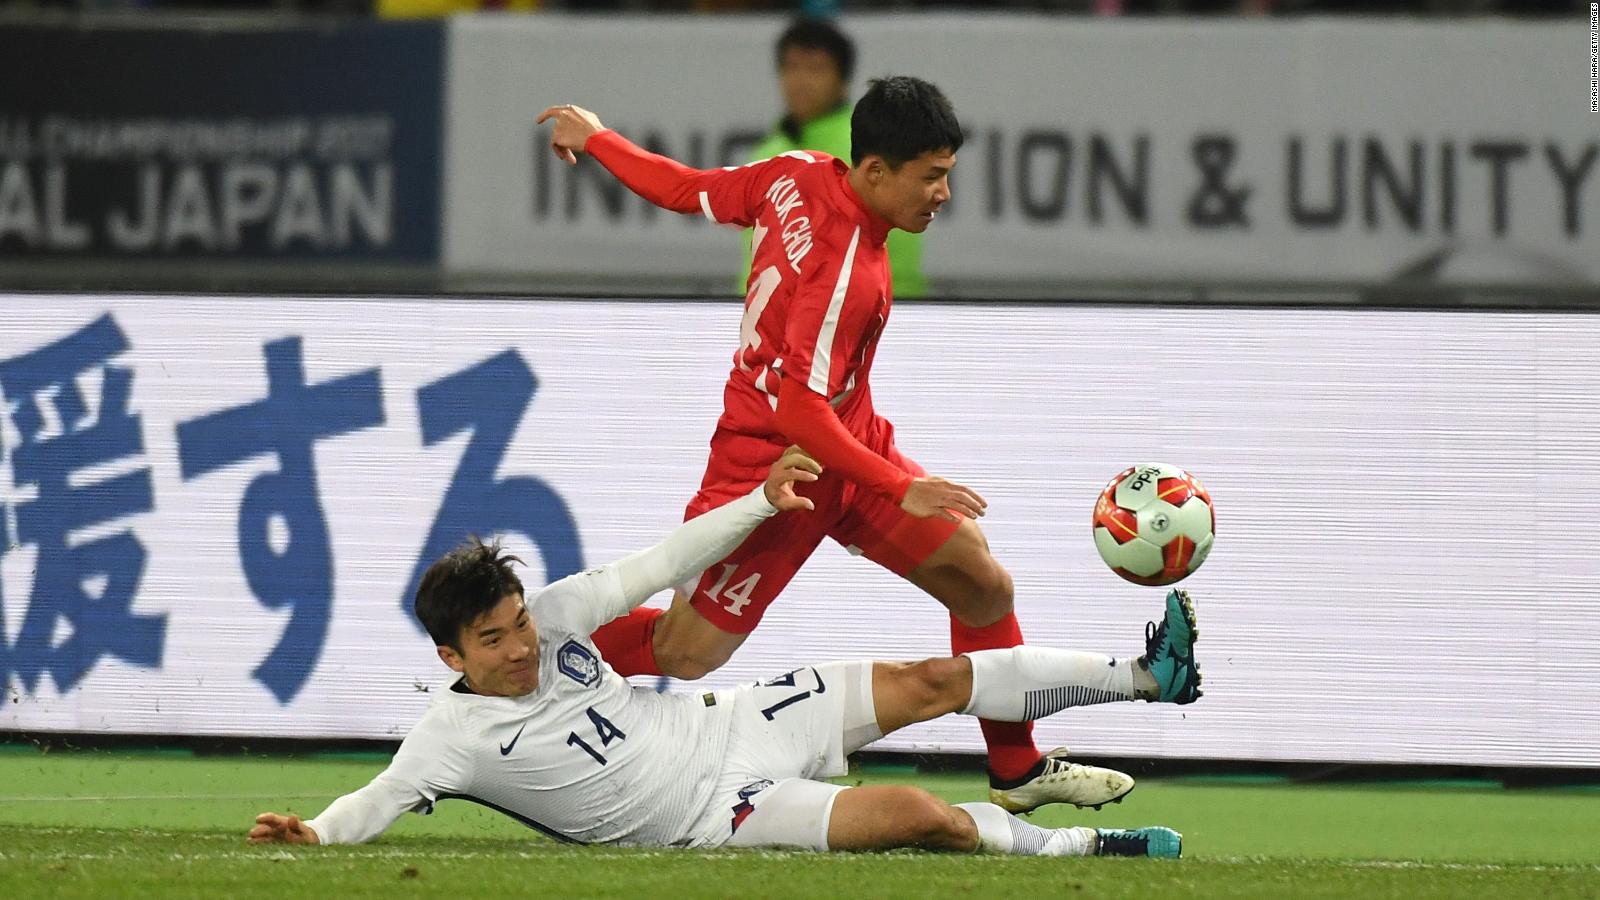 North and South Korea play first men's soccer match on North Korean